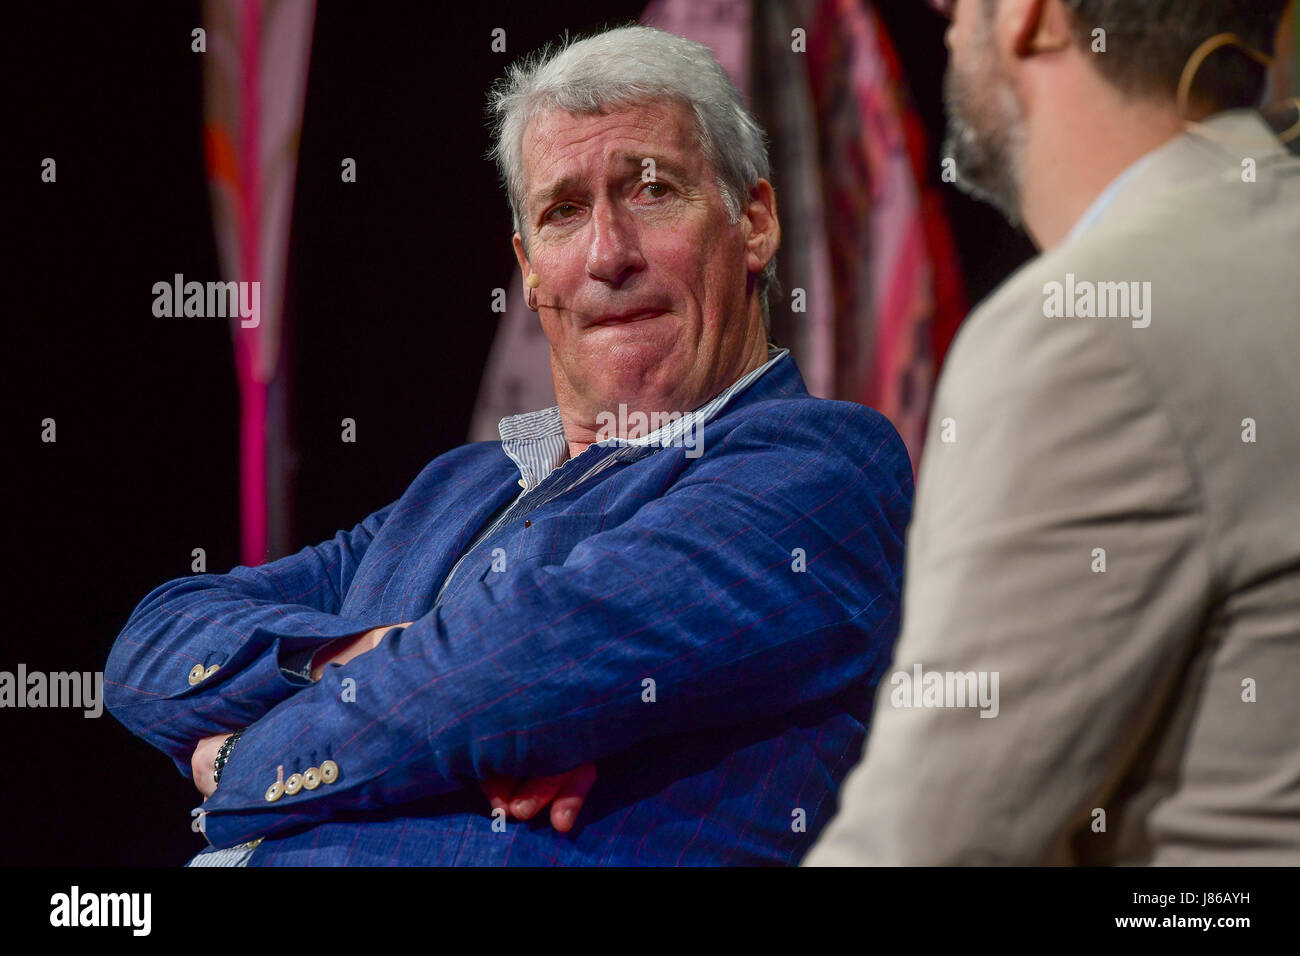 Hay on Wye, Wales UK, Saturday  27 May 2017  Hay Festival 2017 - Jeremy Paxman speaking on the third day of the Hay Festival, which is this year celebrating its 30t anniversary    photo credit ©keith morris / alamy live news Stock Photo